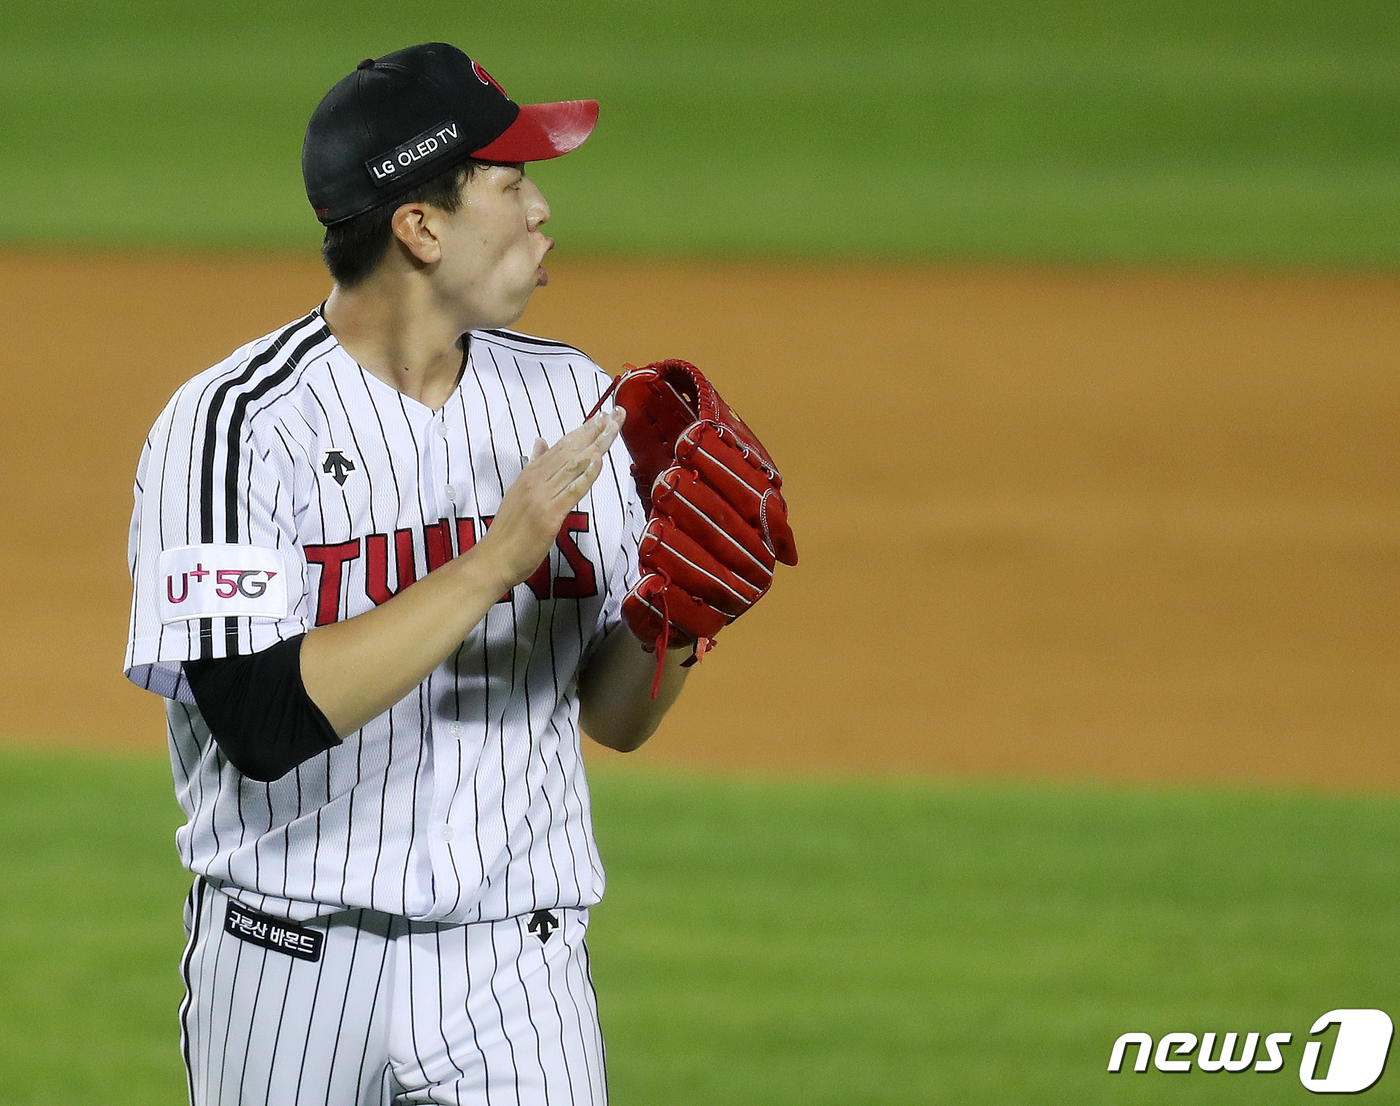 Won Tae-in and Lee Min-ho came out as Cole Hamels as Samsung Lions and LG played the fourth leg of the 2020 Shinhan Bank SOL KBO League season at Seoul Jamsil Stadium on the 2nd.Won Tae-in and Lee Min-ho, a high school graduate in the second year of high school, also played in the Deagu Samsung Lions Park on the 21st of last month.Lee Min-ho scored 513 innings, 1 hit, 4 walks, 2 strikeouts, and scored the first win of the season and the joy of his first professional debut.Won Tae-in also pitched well with two runs in seven innings, six hits, two walks and six strikeouts, but saw the bitter taste of defeat due to the silence of the team.After 12 days, the confrontation was again concluded. The place was moved to Seoul Jamsil Stadium, not Deagu.On the day, the two men played a well-played relay as if proving that the last start was not a coincidence. Won Tae-in scored five hits in seven innings, three strikeouts and three strikeouts.Lee Min-ho also gave up five hits and two walks in seven innings, but allowed only two runs while striking out seven.As the Samsung Lions are 2-0 ahead of LG in the eighth inning, Won Tae-in will win three wins (1 loss) in the season and Lee Min-ho will lose one loss (1 win) in the season.Lee Min-ho didnt catch the early feeling: The start of bad luck was that he was hit in an exquisite position in front of right fielder Kim Sang-soo, the leading hitter in the first inning.After sending Park Chan-do out on the walk, Saladino allowed a two-run timely hit to fall deep into the left-field left fence.Saladino was tagged In-N-Out Burger after running to third base.Danger felt so bad that catcher and pitcher coach came on the mound once, but he finished the first inning with two subsequent batters in-N-Out Burger without additional runs.The struggling Lee Min-ho changed the Bunger in the second inning with a three-legged walk; in the third inning, he allowed two hits to go to second and third base Danger, but he stopped it without a run.In the fourth inning, he sent out runners with sasagu, but ended the inning with proper checks. In the fifth inning, he was cleanly in the third inning, and in the sixth inning in the seventh inning.Won Tae-in was also tough, starting well with a third-inning run in the first inning, and Kim Min-sung hit a double in the second inning, but quickly caught a follow-up hitter.The third was also easily finished, but the fourth was Danger, who was hit by Lee Chun-woong and Kim Hyun-soo in a row and placed in first and second bases.However, Roberto Ramos struck out, Kim Min-sung and Oh Ji-hwan all managed to stop the ball without a run.Won Tae-in, who was in the momentum, passed the mound with the victory requirement by blocking the LG line without any Danger at the end of the fifth, sixth and seventh innings.7 innings side by side, 2-0 Samsung Lions lead